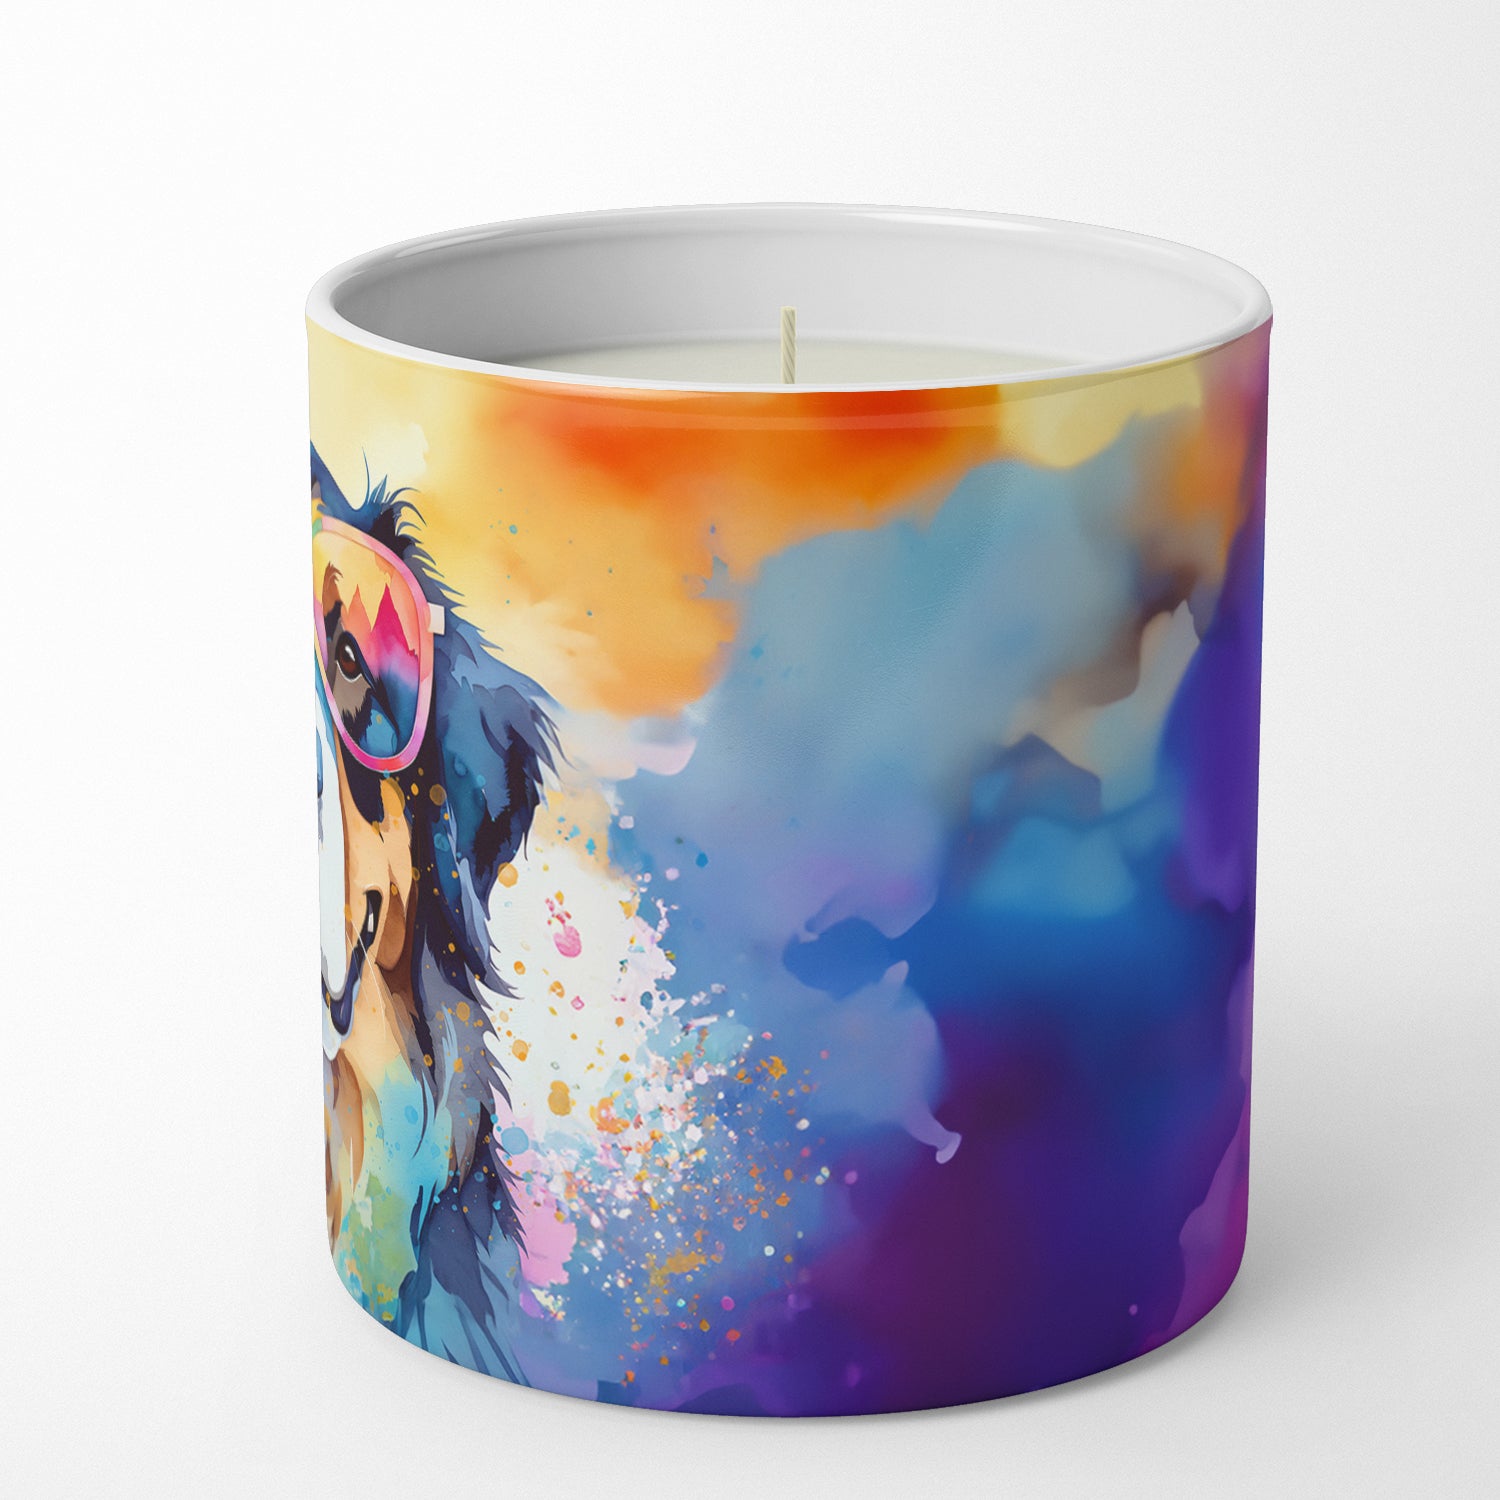 Bernese Mountain Dog Hippie Dawg Decorative Soy Candle